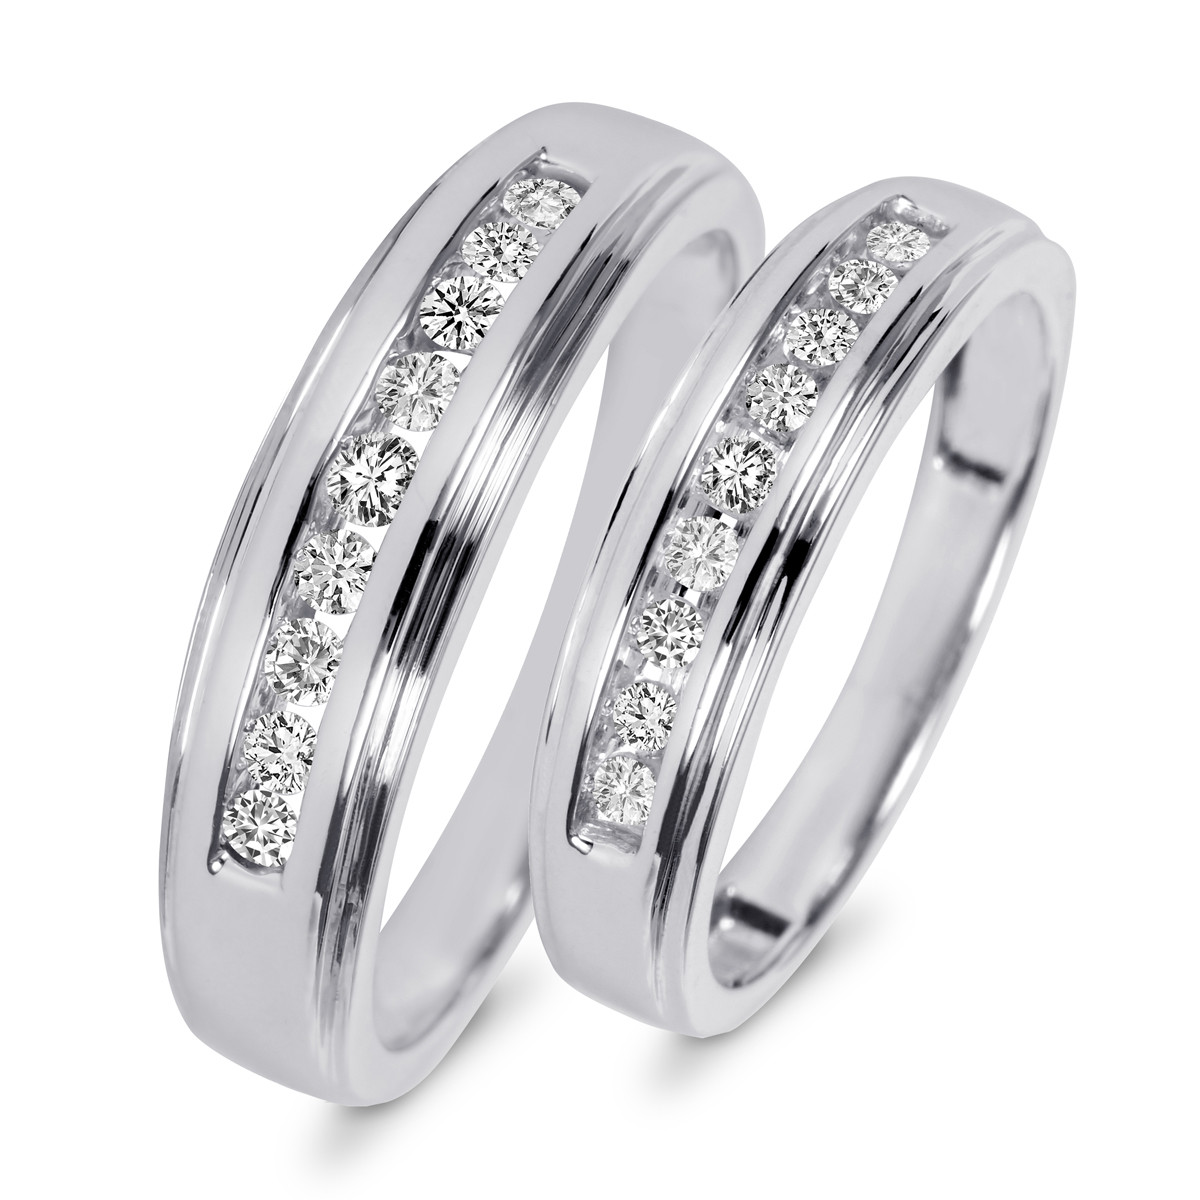 White Gold Wedding Ring Sets His And Hers
 3 8 Carat T W Diamond His And Hers Wedding Band Set 10K